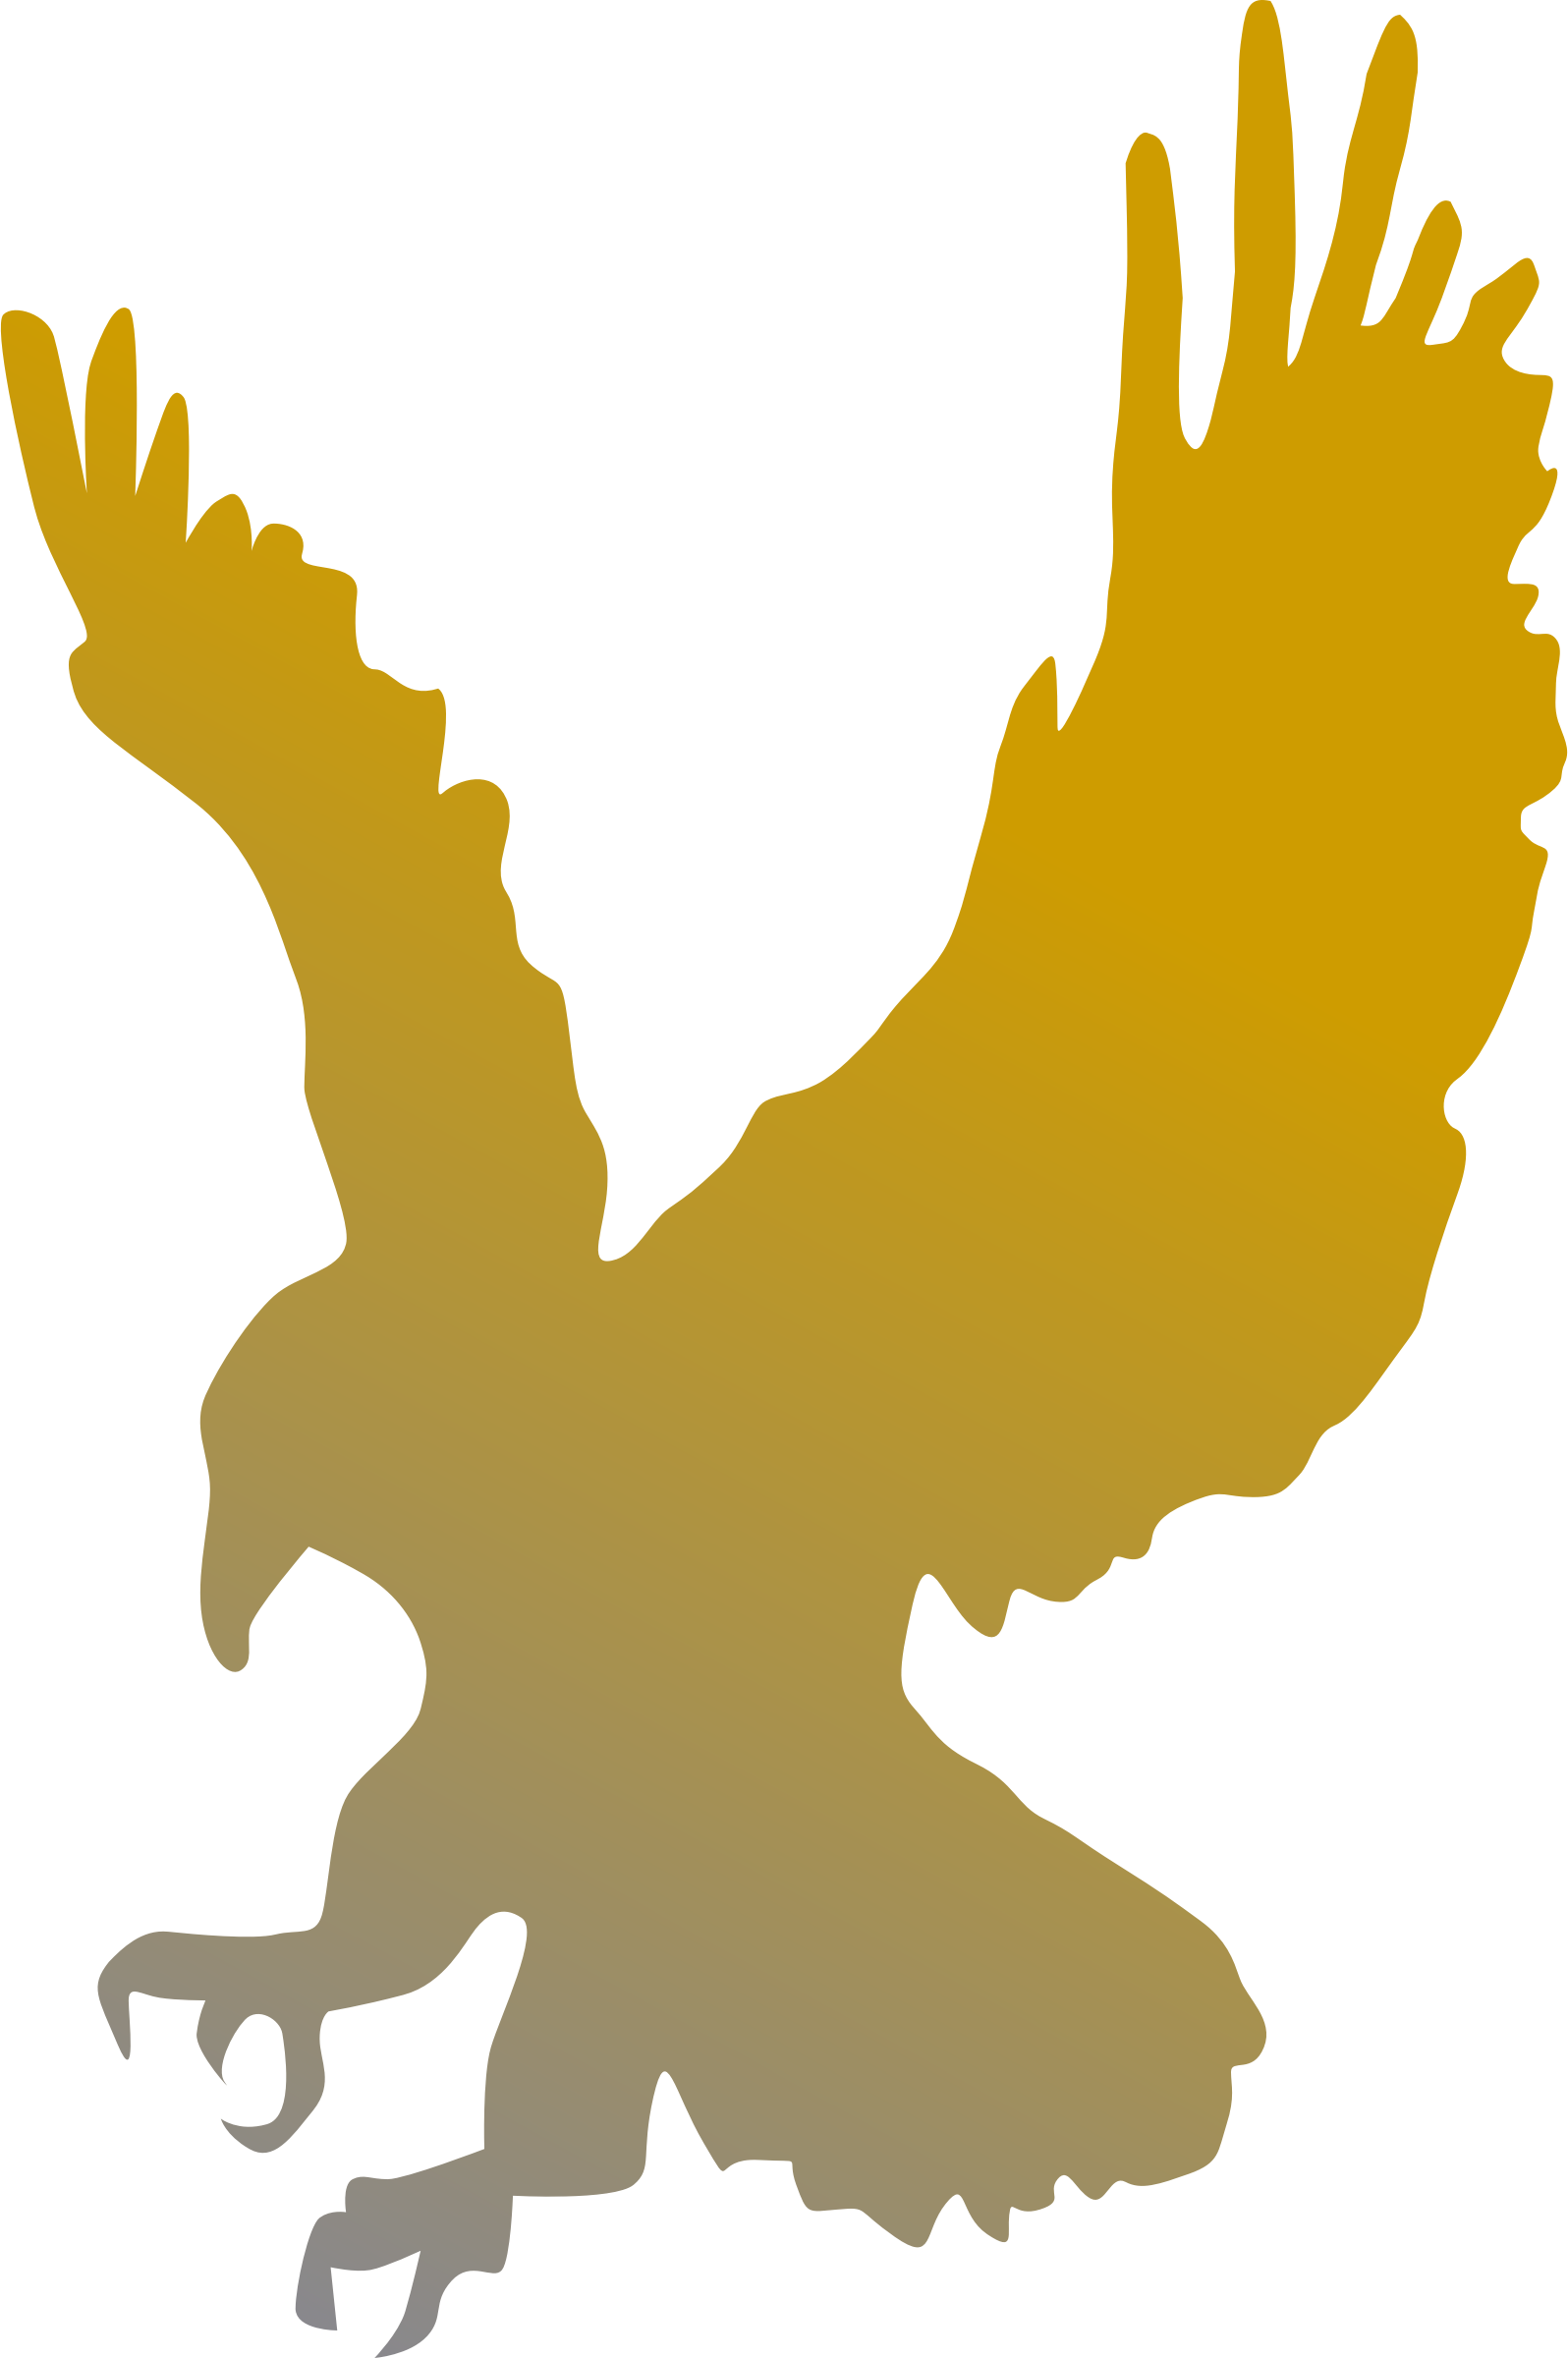 Download Golden Eagle Vector Clipart image - Free stock photo ...